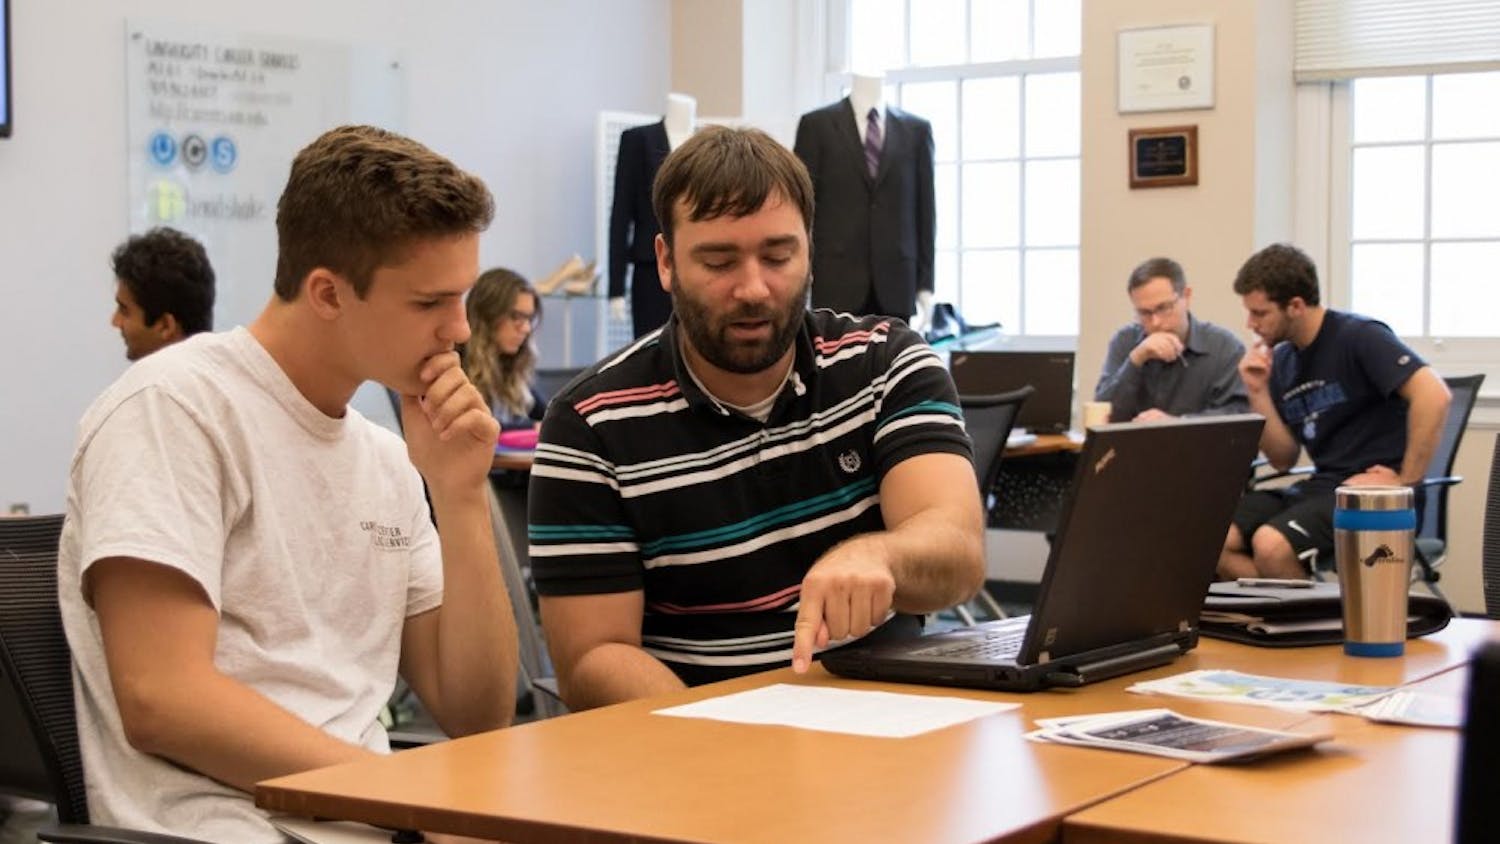 UNC student Trey Sullivan (left) and Assistant Director of Career Services, Jonathan Adams (right), participate in a business school workshop in Hanes Hall on Aug. 28, 2017.